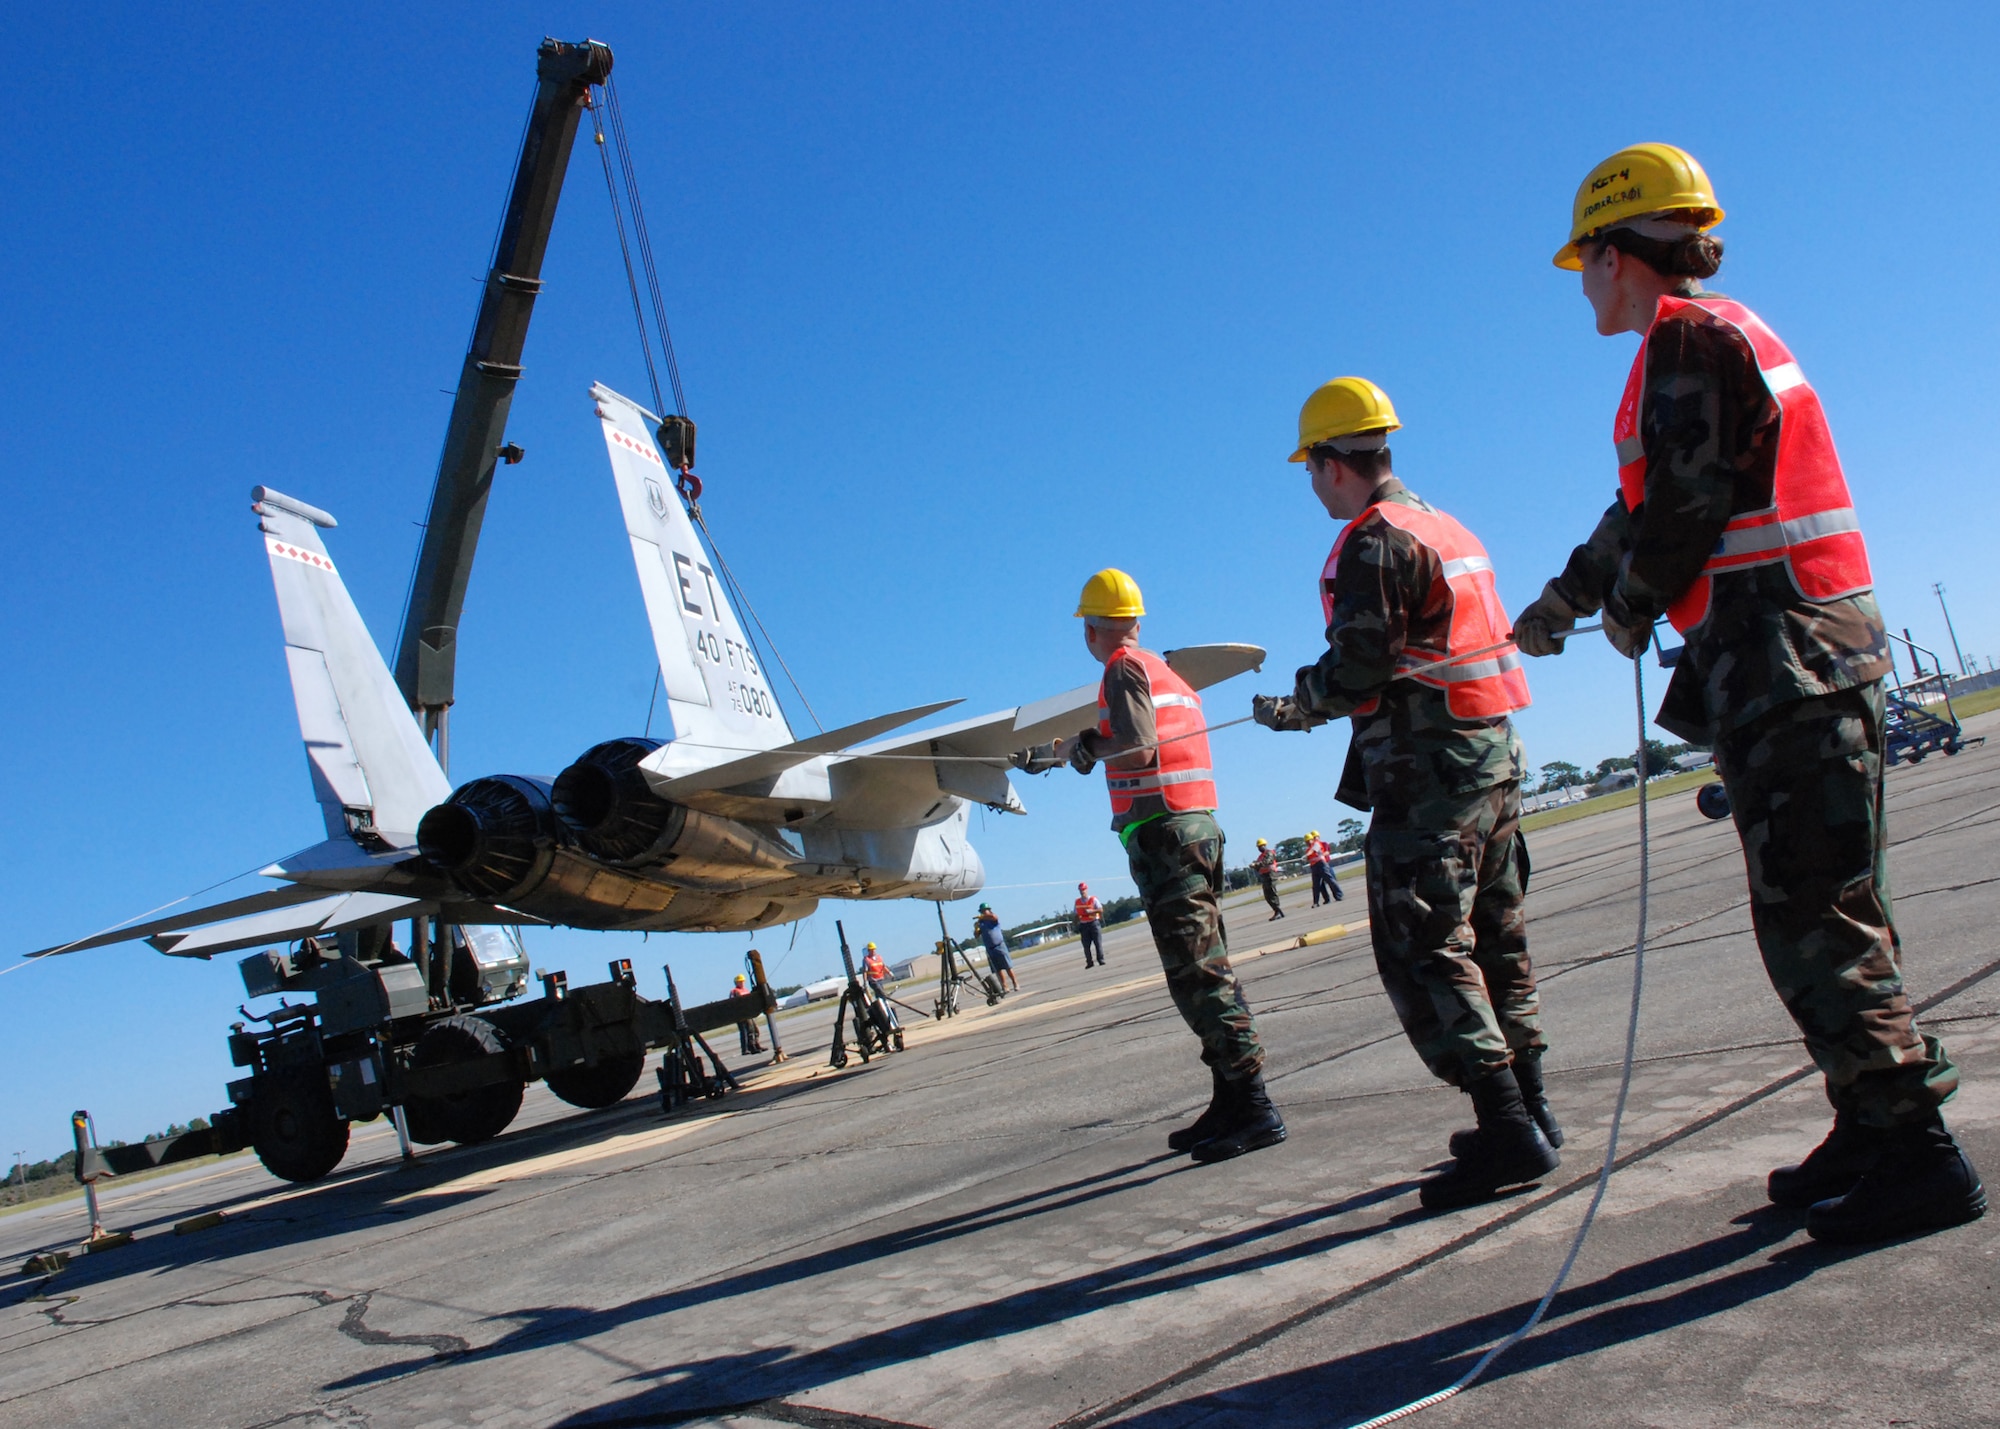 EGLIN AIR FORCE, Fla. -- Staff Sgt. Jeremy Buntz, Airman 1st Class Warren Rendon and Staff Sgt. Destiny Harp, 33rd Maintenance Sqaudron, helps hold an F-15 steady as it hangs from a crane an is loaded onto a flatbed trainler for transport Oct. 12. Indyne Inc. U.S. Targets and the 46th Test Wing is moving the F-15 to Range 52 for future testing missions.The crew, lifted the aircraft, collapsed the landing gear and hoisted it onto a flatbed trailer to be transported to Range 52 off Range Road 213. They are scheduled to move the jet beginning at 2 a.m. Oct. 13. (U.S Air Force Photo by Staff Sgt. Mike Meares)